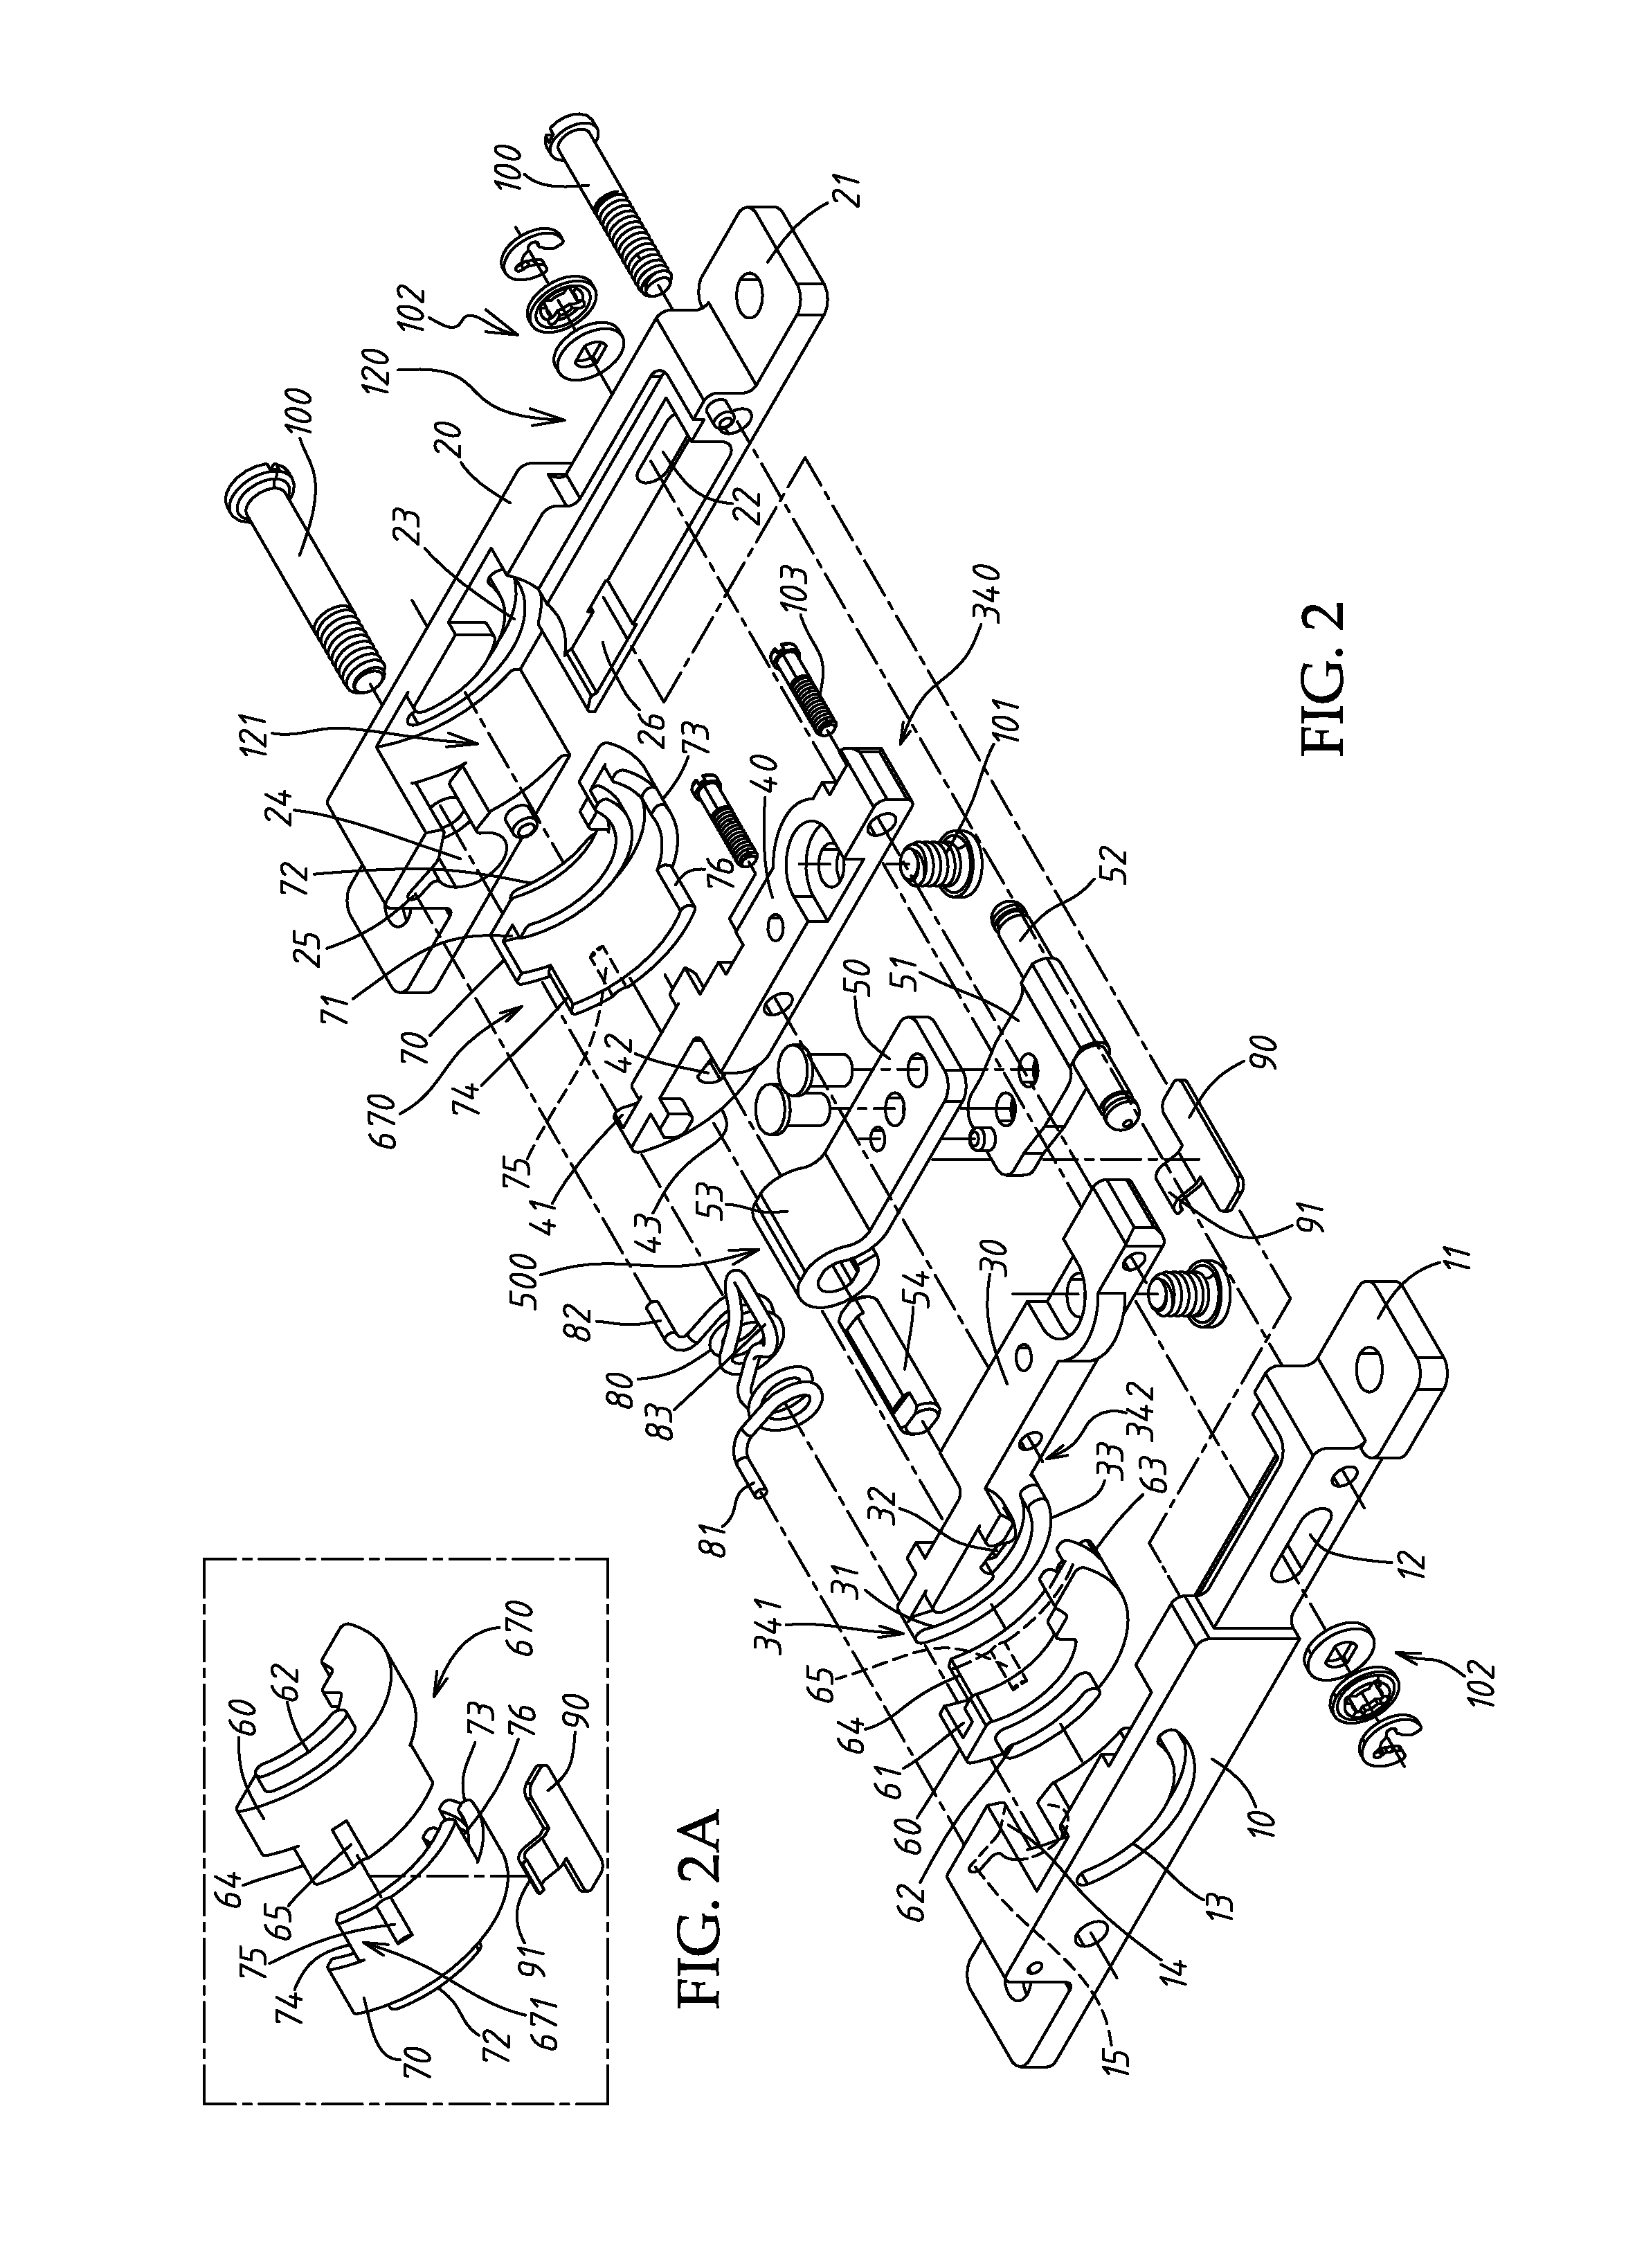 Hinge device capable of extending rotational angle